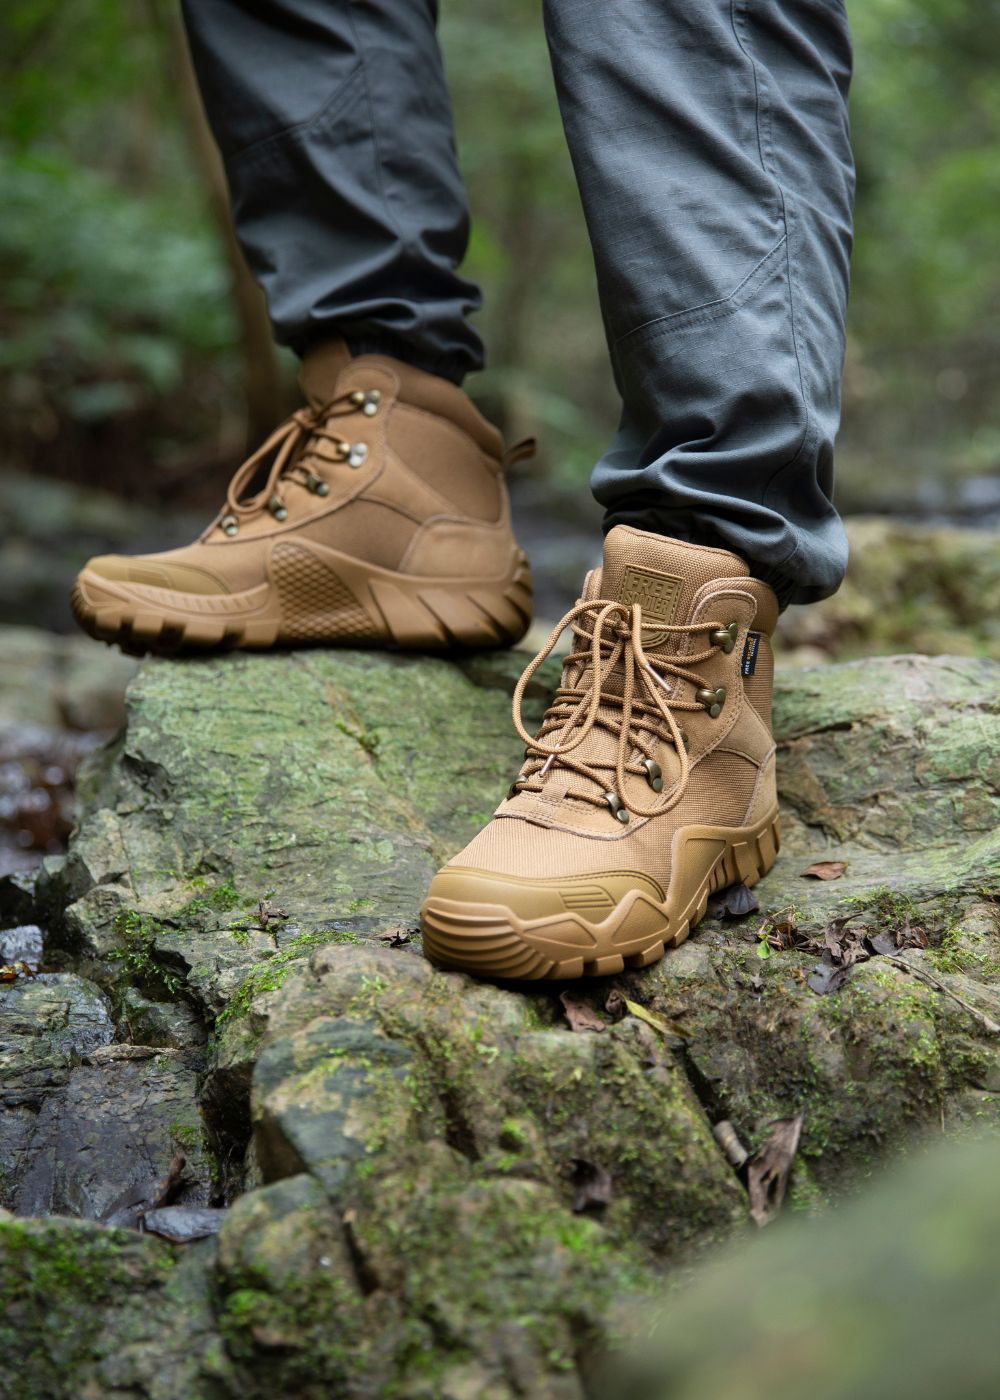 Multi-Purpose Tactical Shoes & Clothing